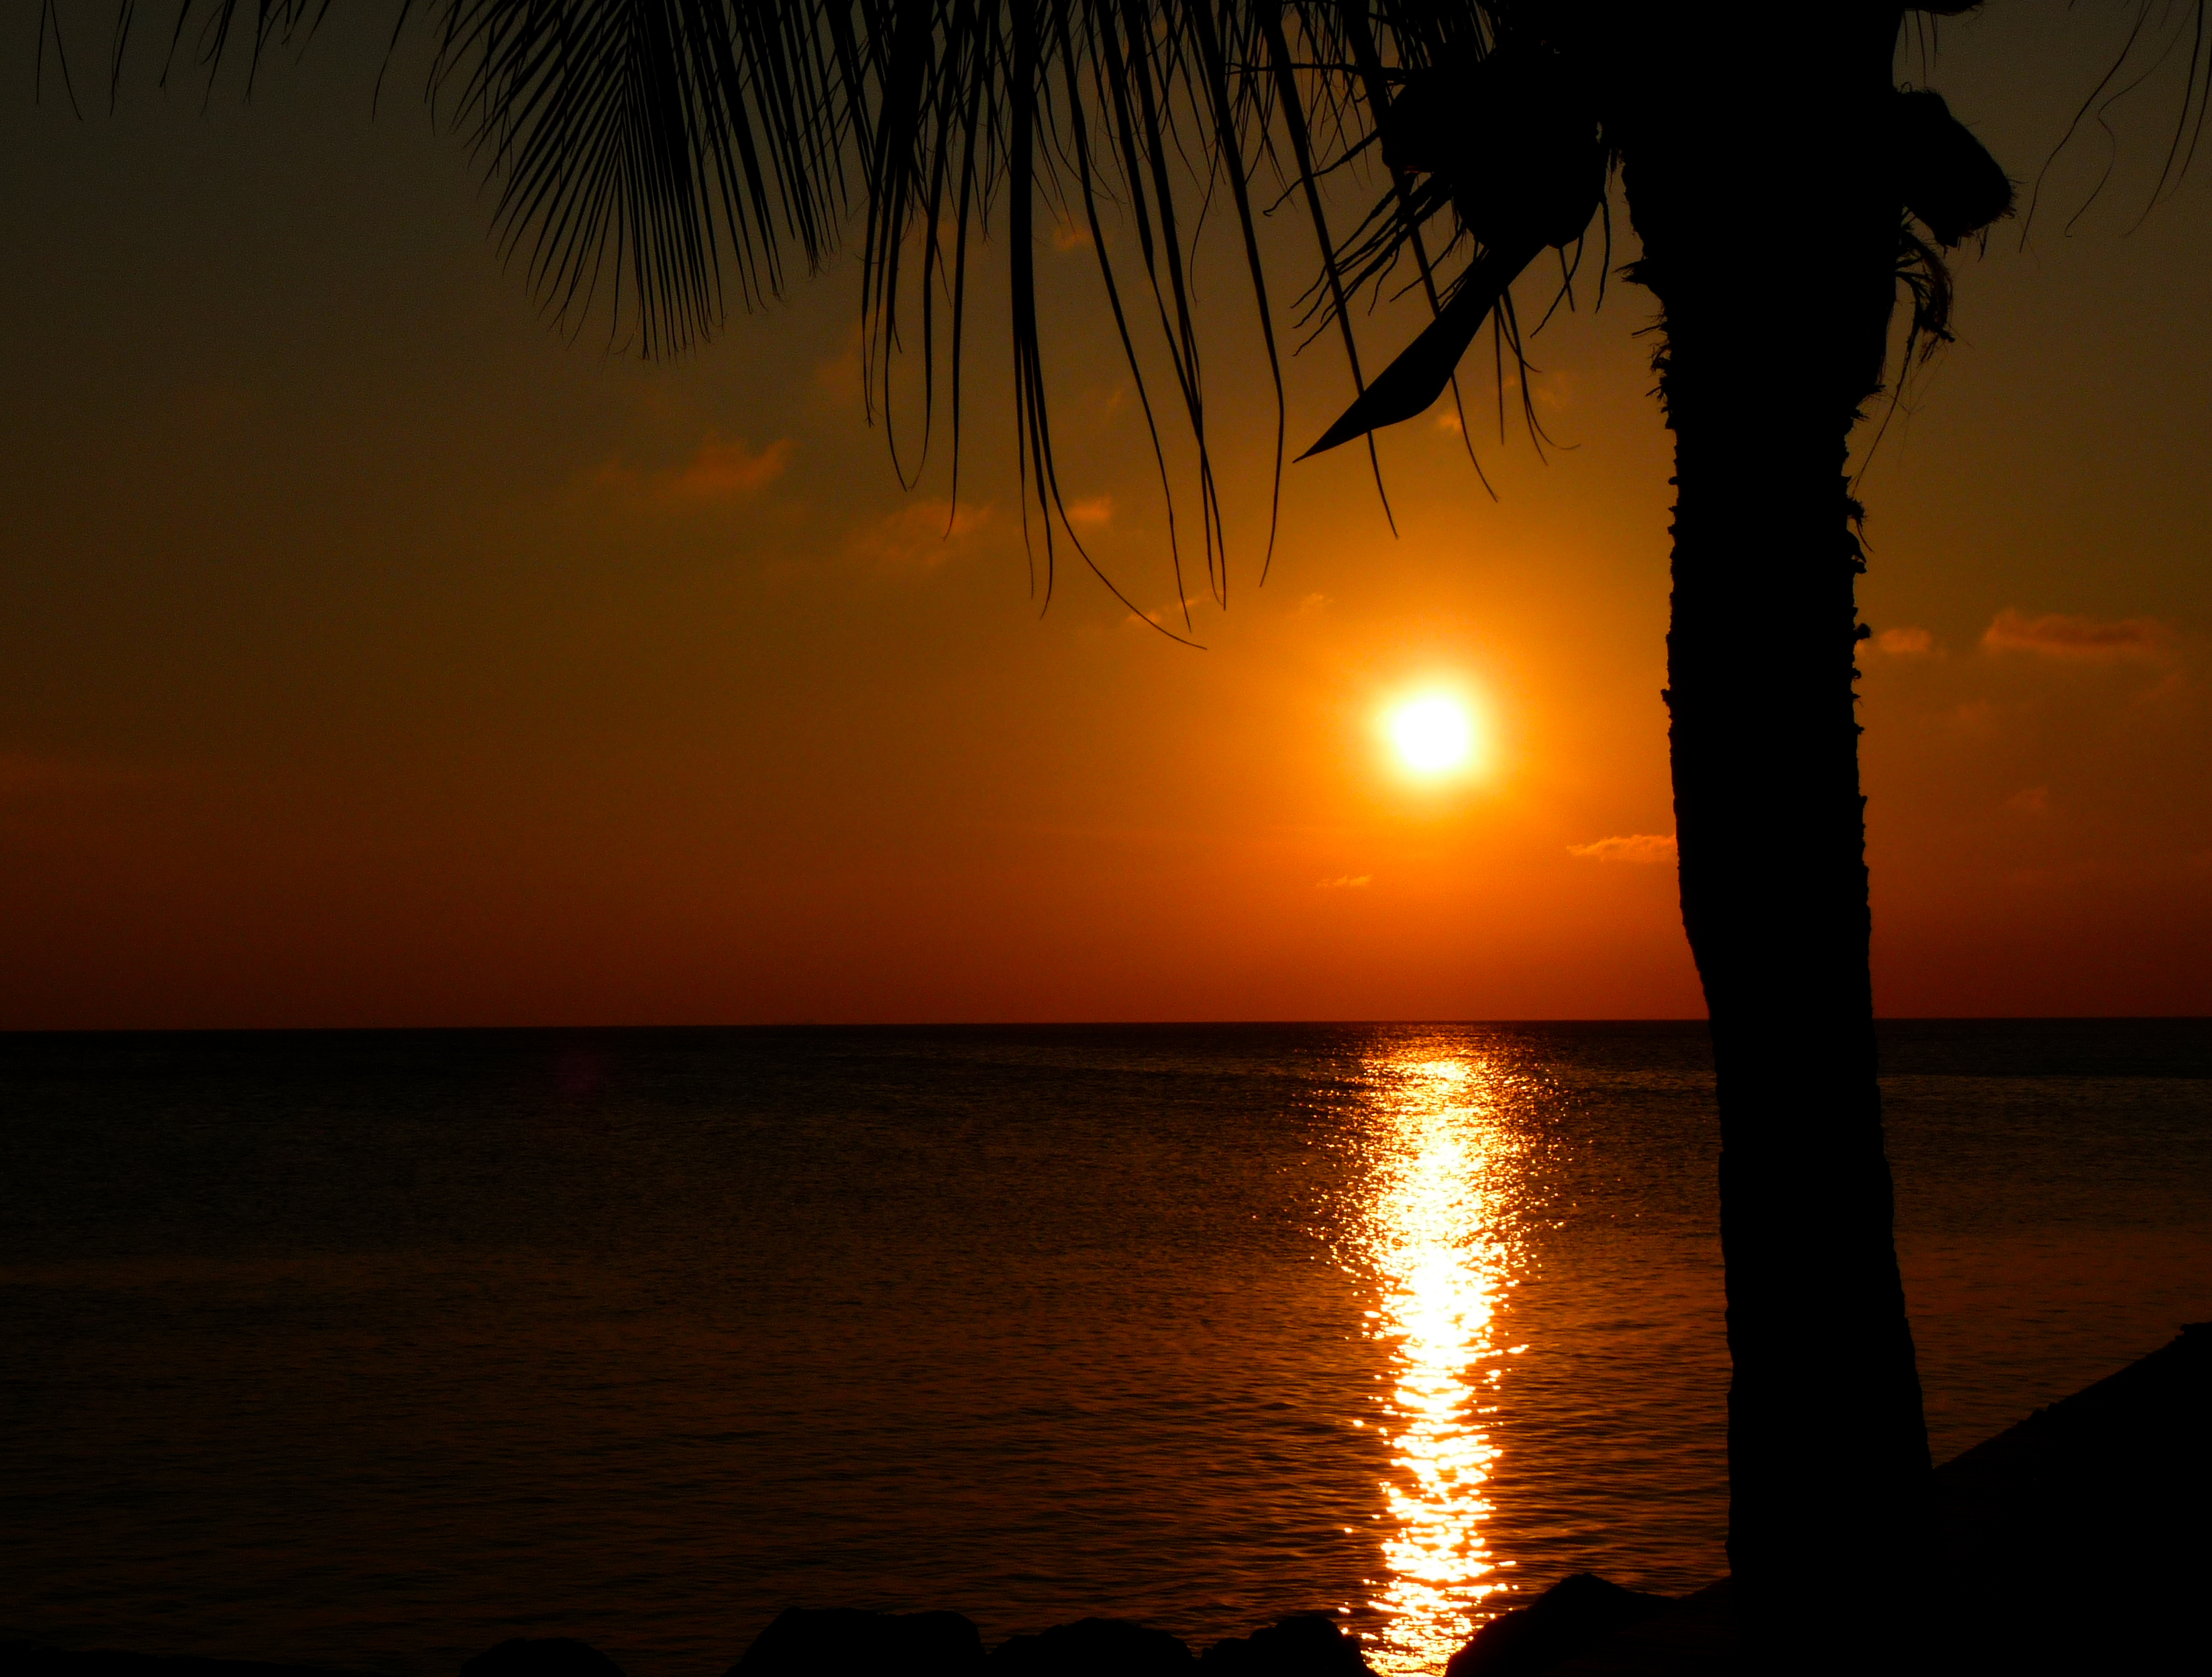 sea dawn sunset holiday - We Buy Apartments in San Antonio - OUR MAIN FOCUS RIGHT NOW IS 4 to 30 UNIT BUILDINGS!